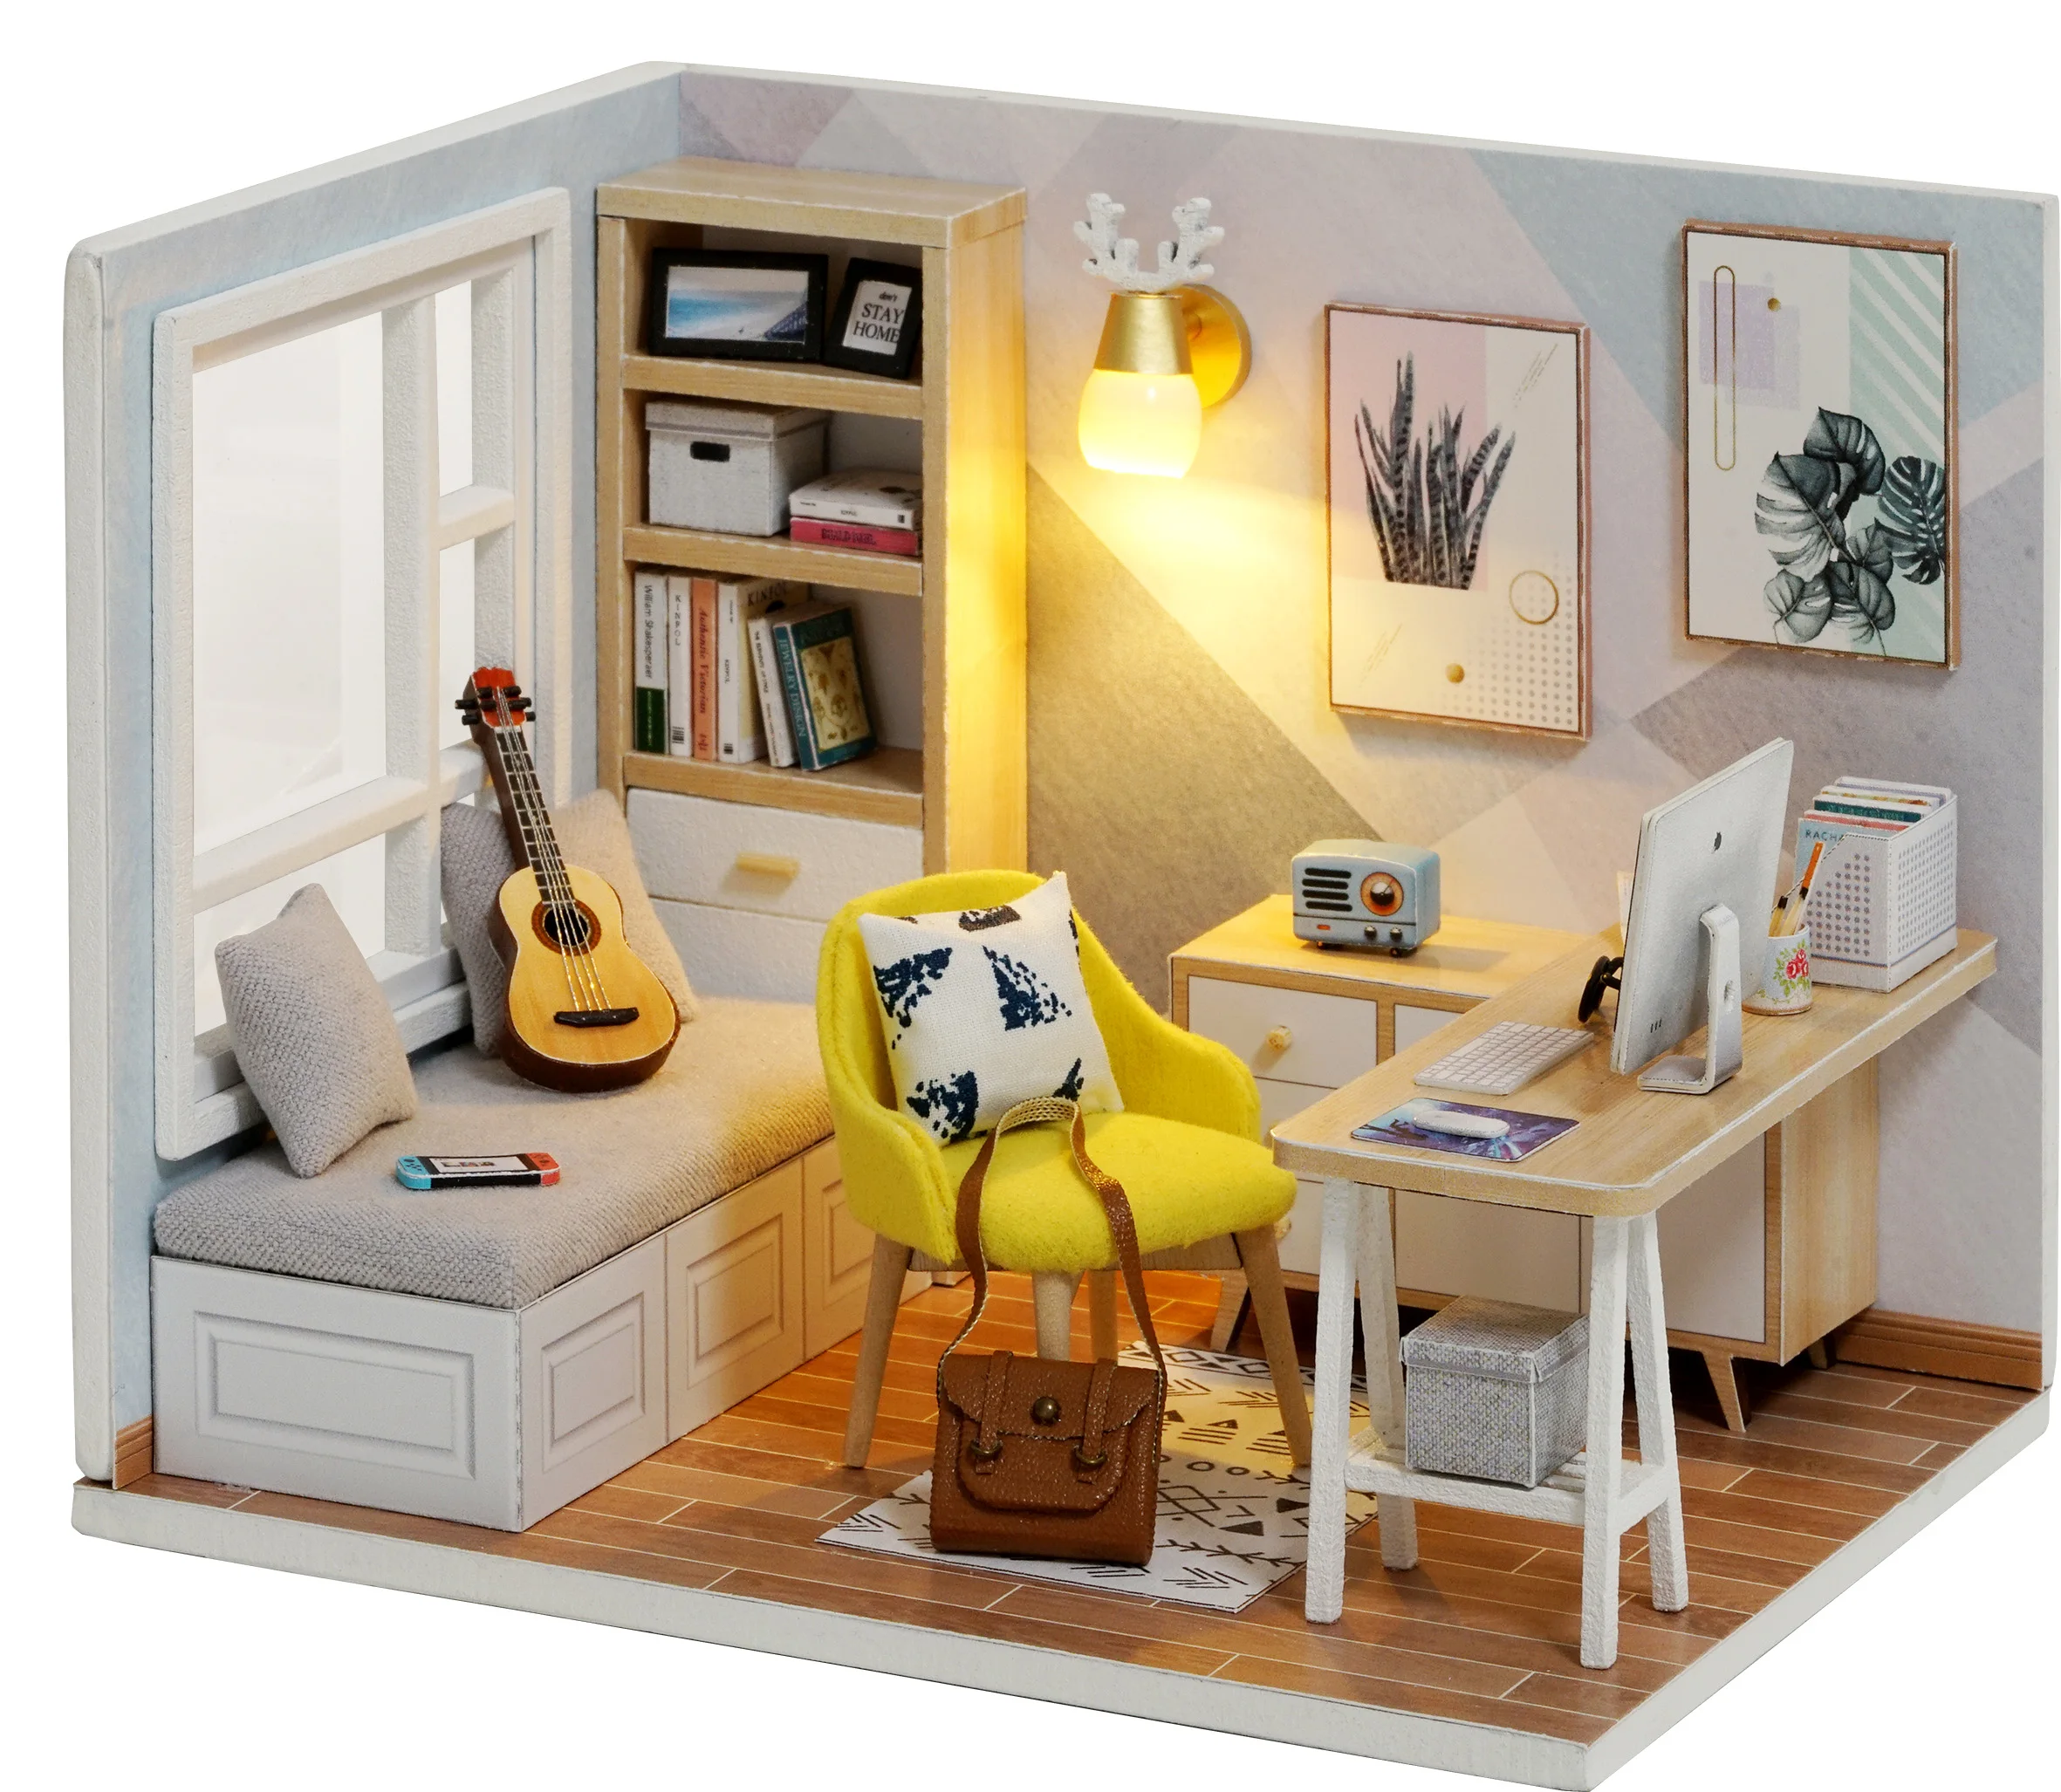 Ice Cream Shop Dollhouse Miniature with Furniture,DIY 3D Wooden Doll House Kit Scenes Style Plus with Dust Cover and LED,1:24 Scale Creative Room Idea Best Gift for Children Friend Lover BM522 